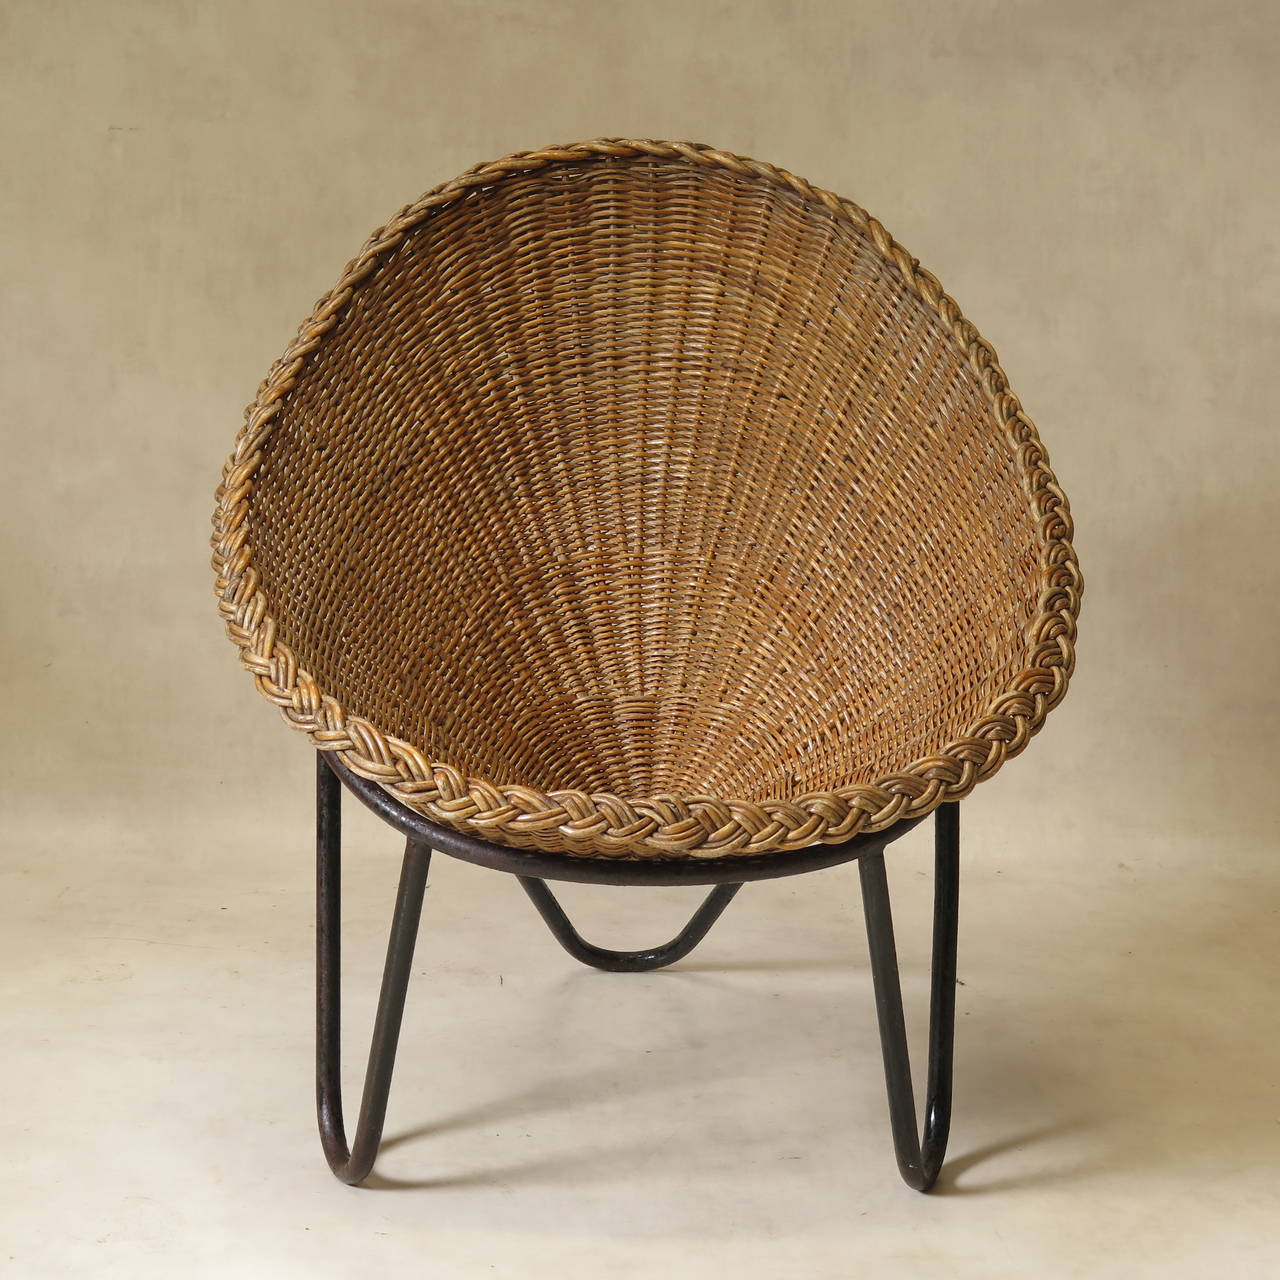 Unusual and funky lounge chair with a tripod solid iron base and sturdy conical, egg-shaped wicker seat.

